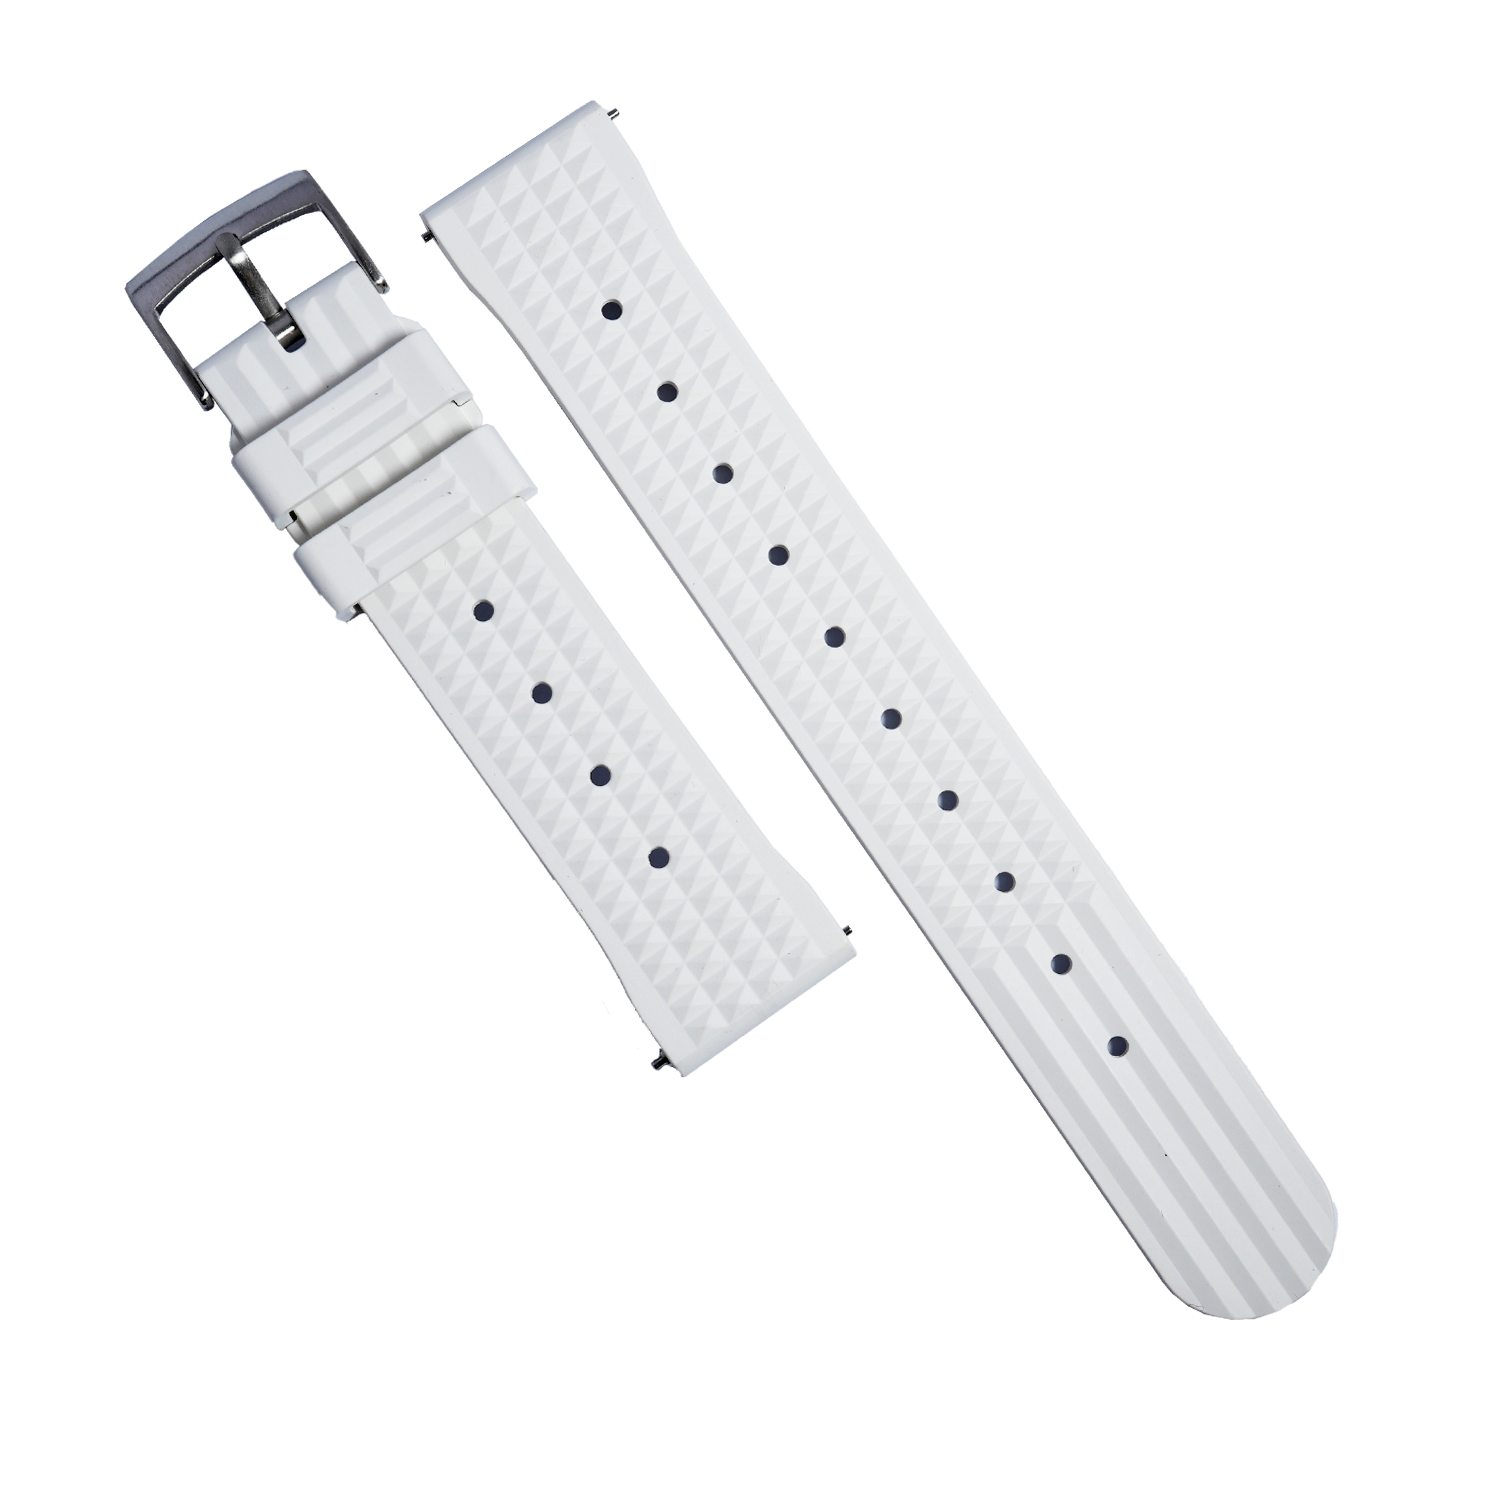 Waffle FKM Rubber Strap in White - Nomad Watch Works MY